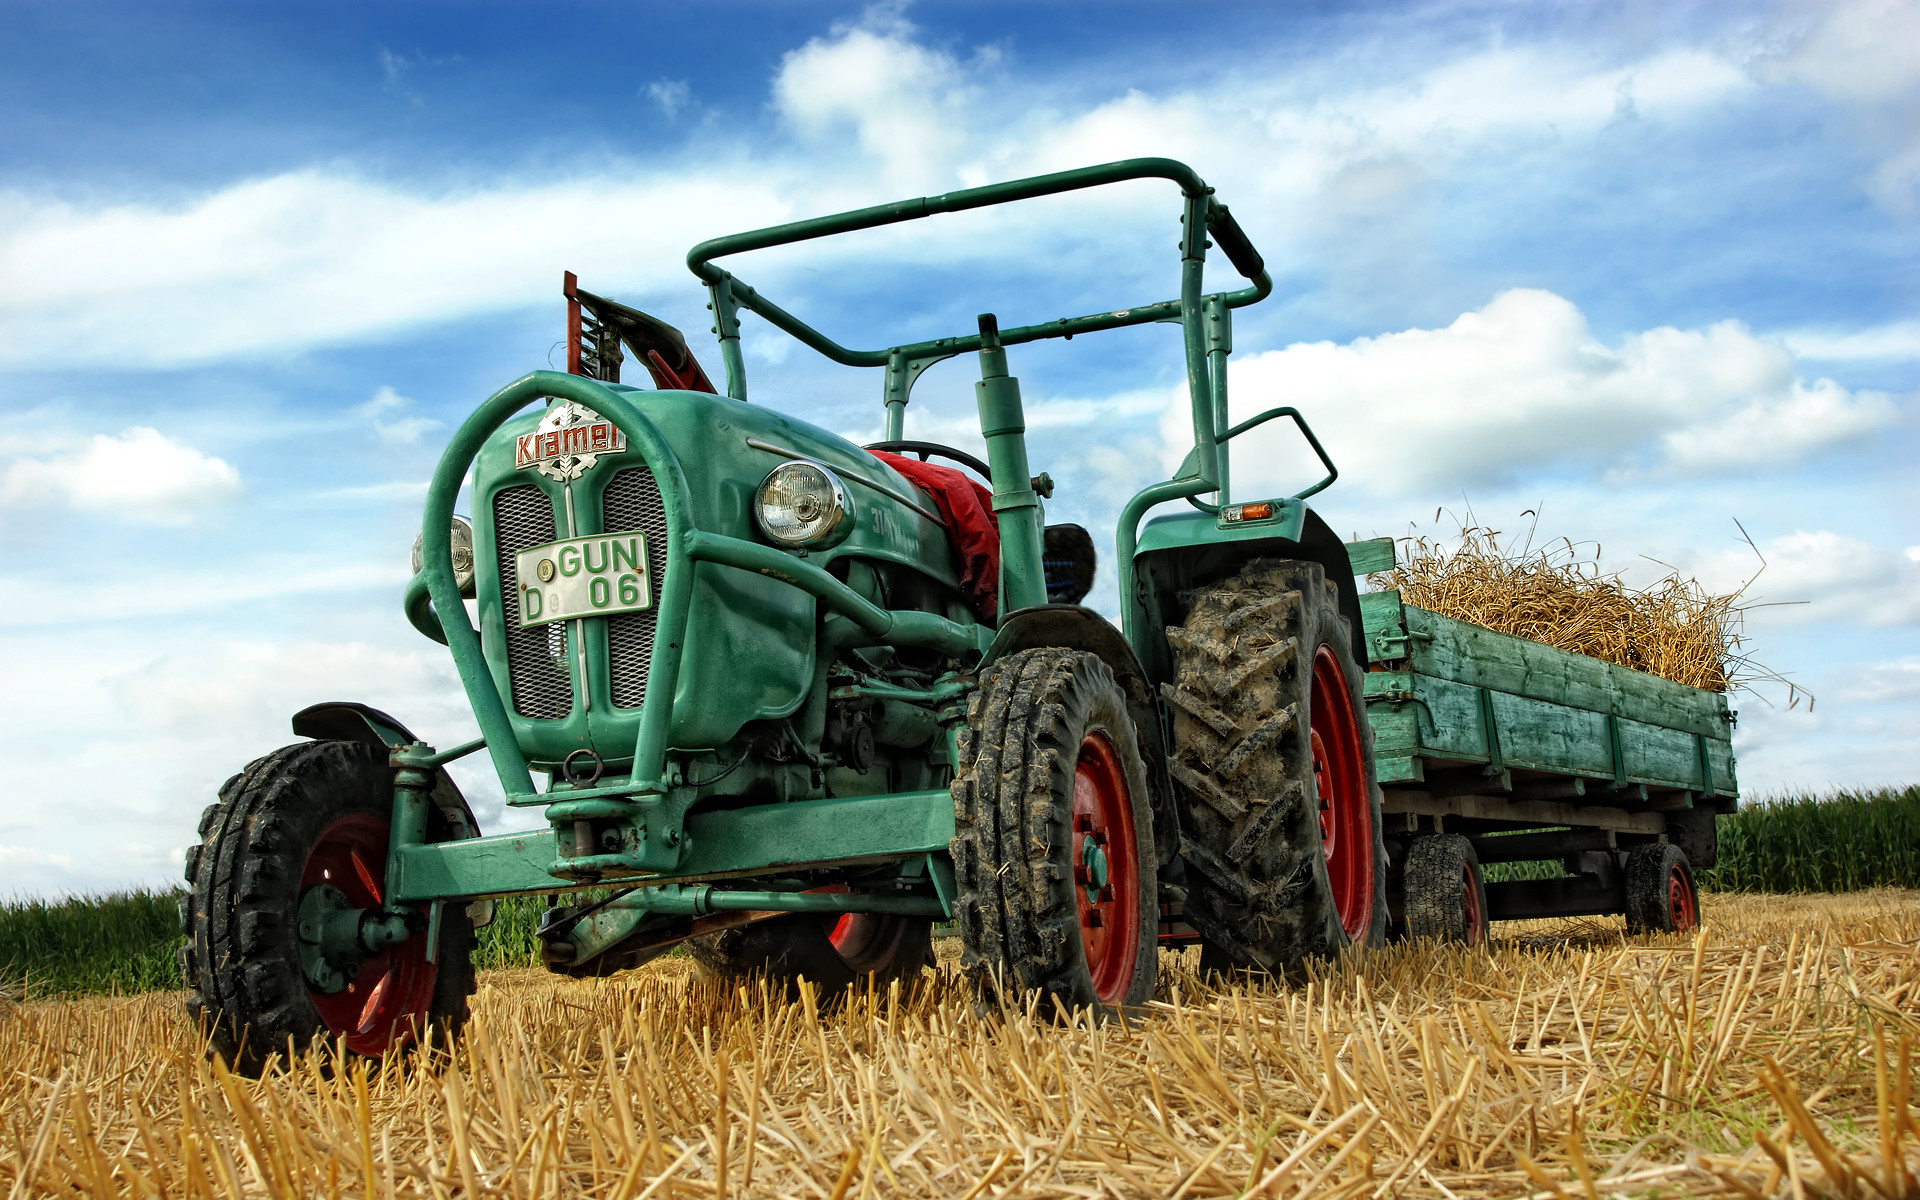 Old Tractor Wallpaper Tractor Images Wallpapers Wallpapers) - High Resolution Tractor - HD Wallpaper 